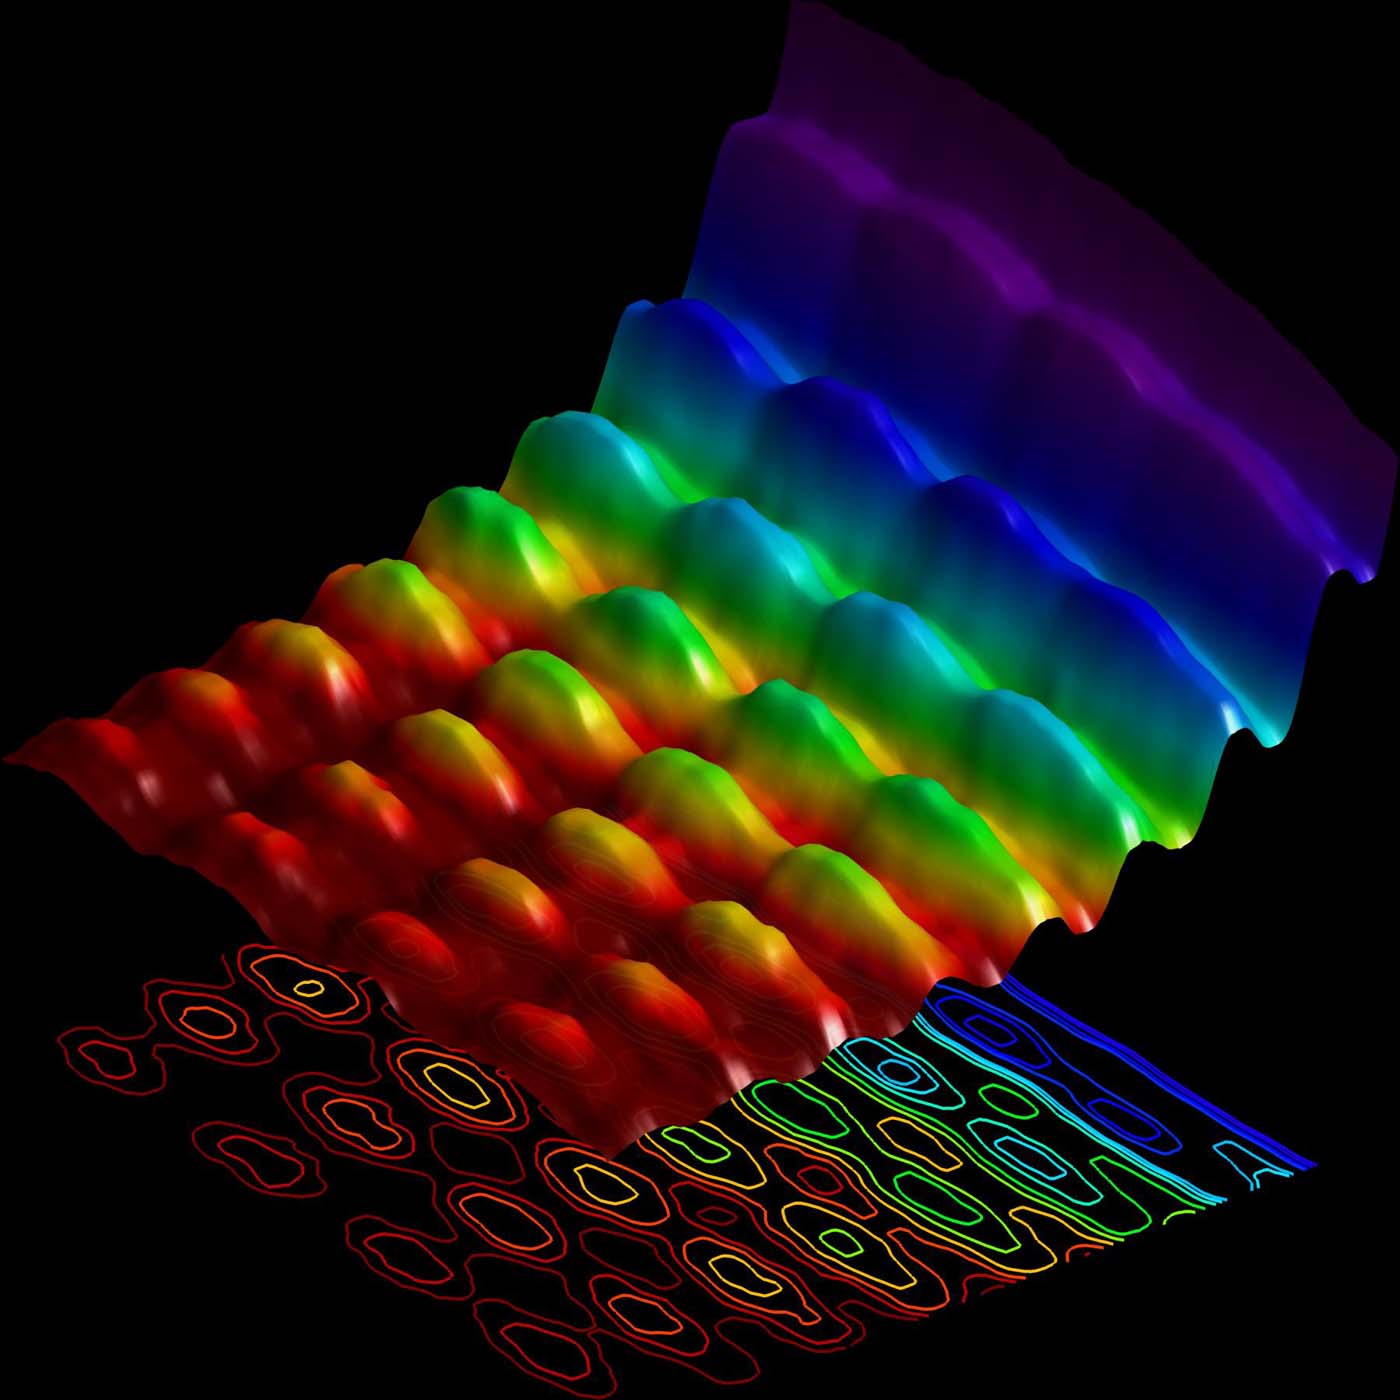 Visualization of light as both a particle and a wave. Image credit: EFPL.